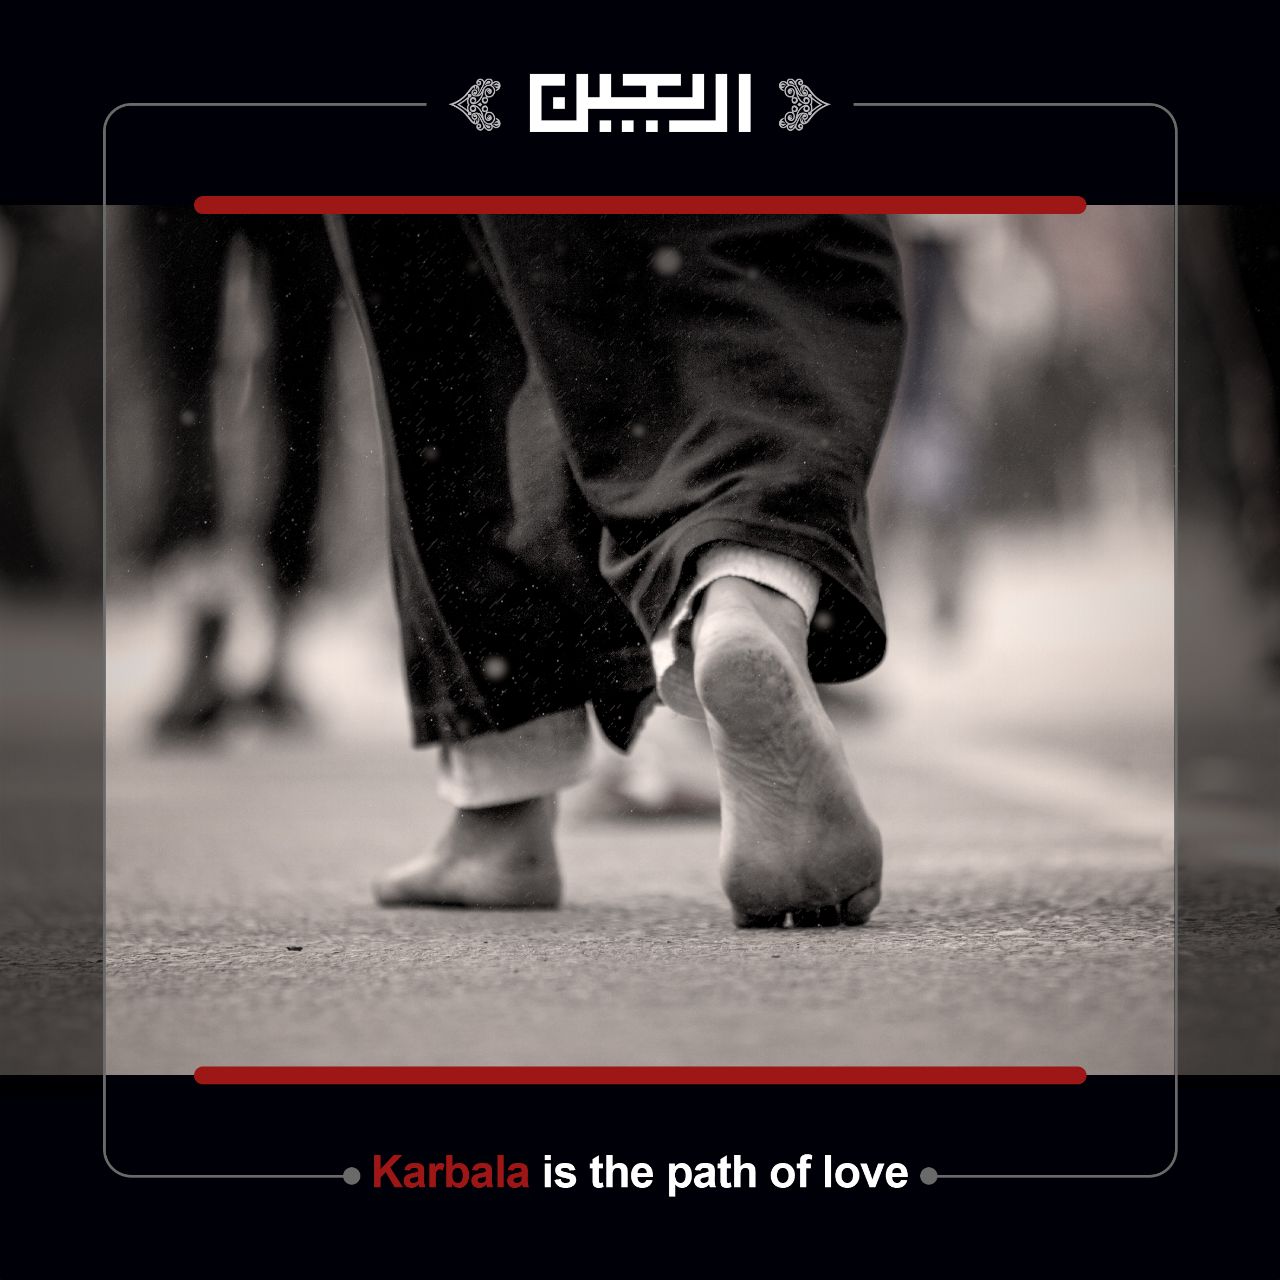 Karbala is the path of love